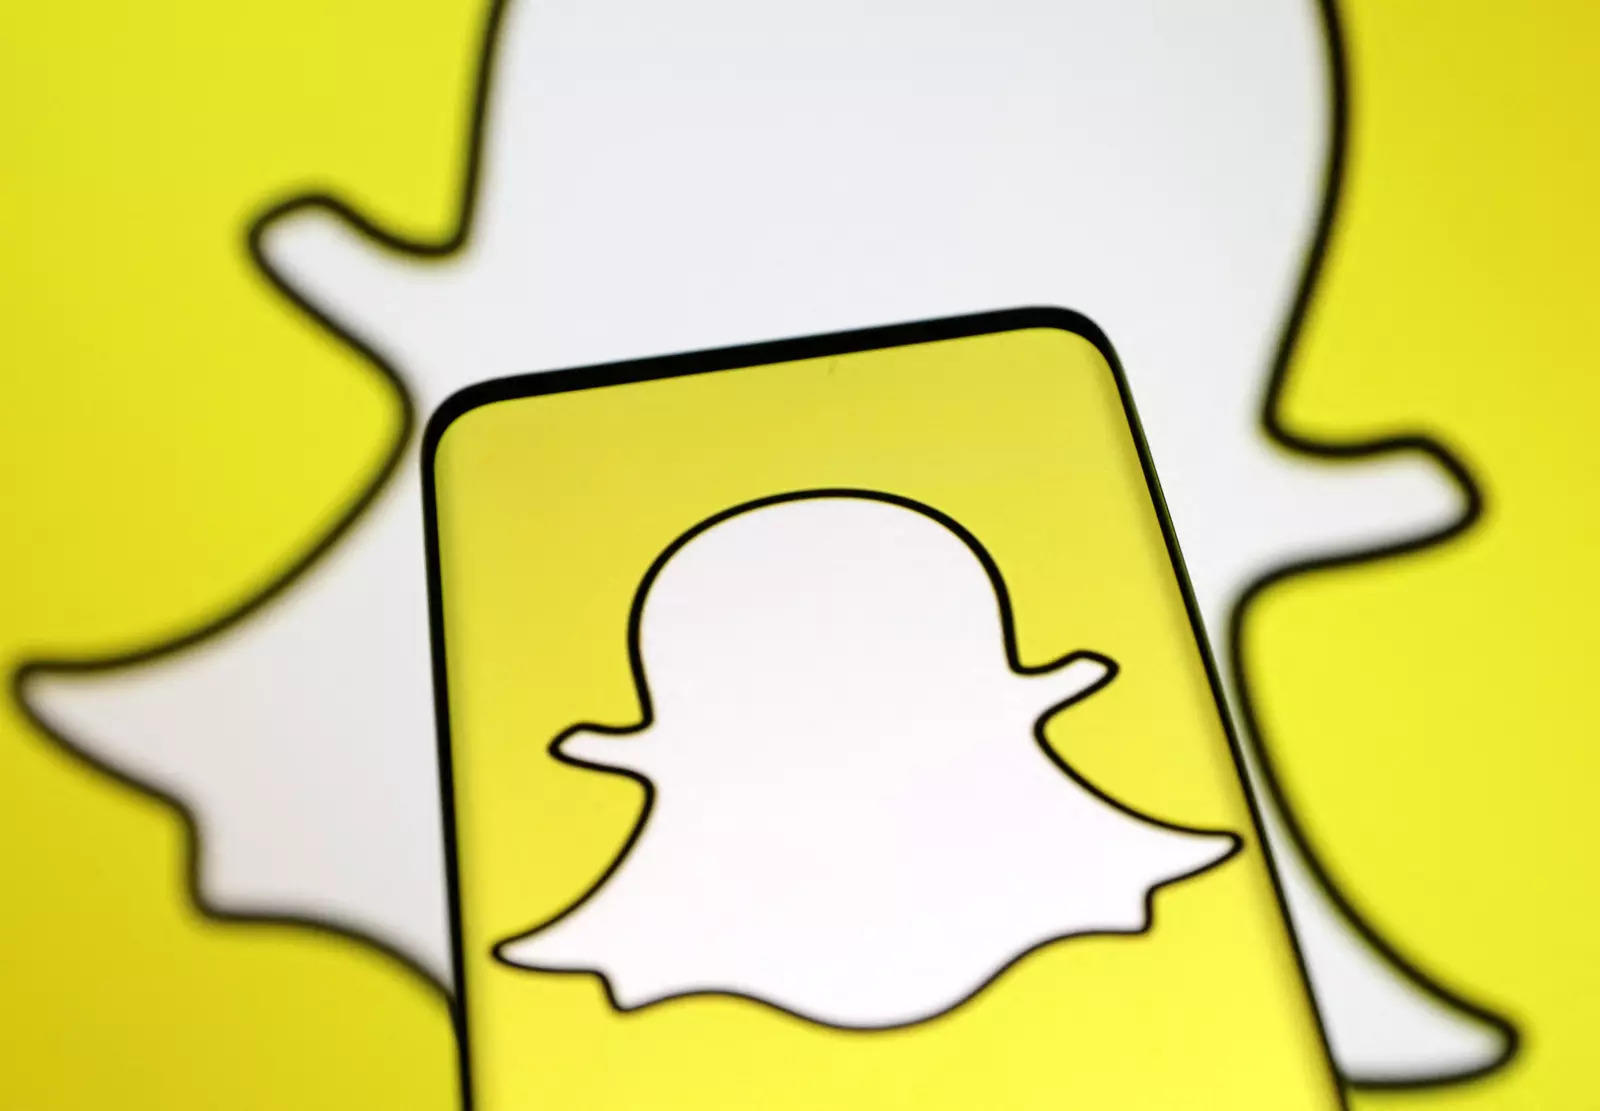 Snapchat to pay musicians up to $100K per month for top-performing songs,  ET Telecom